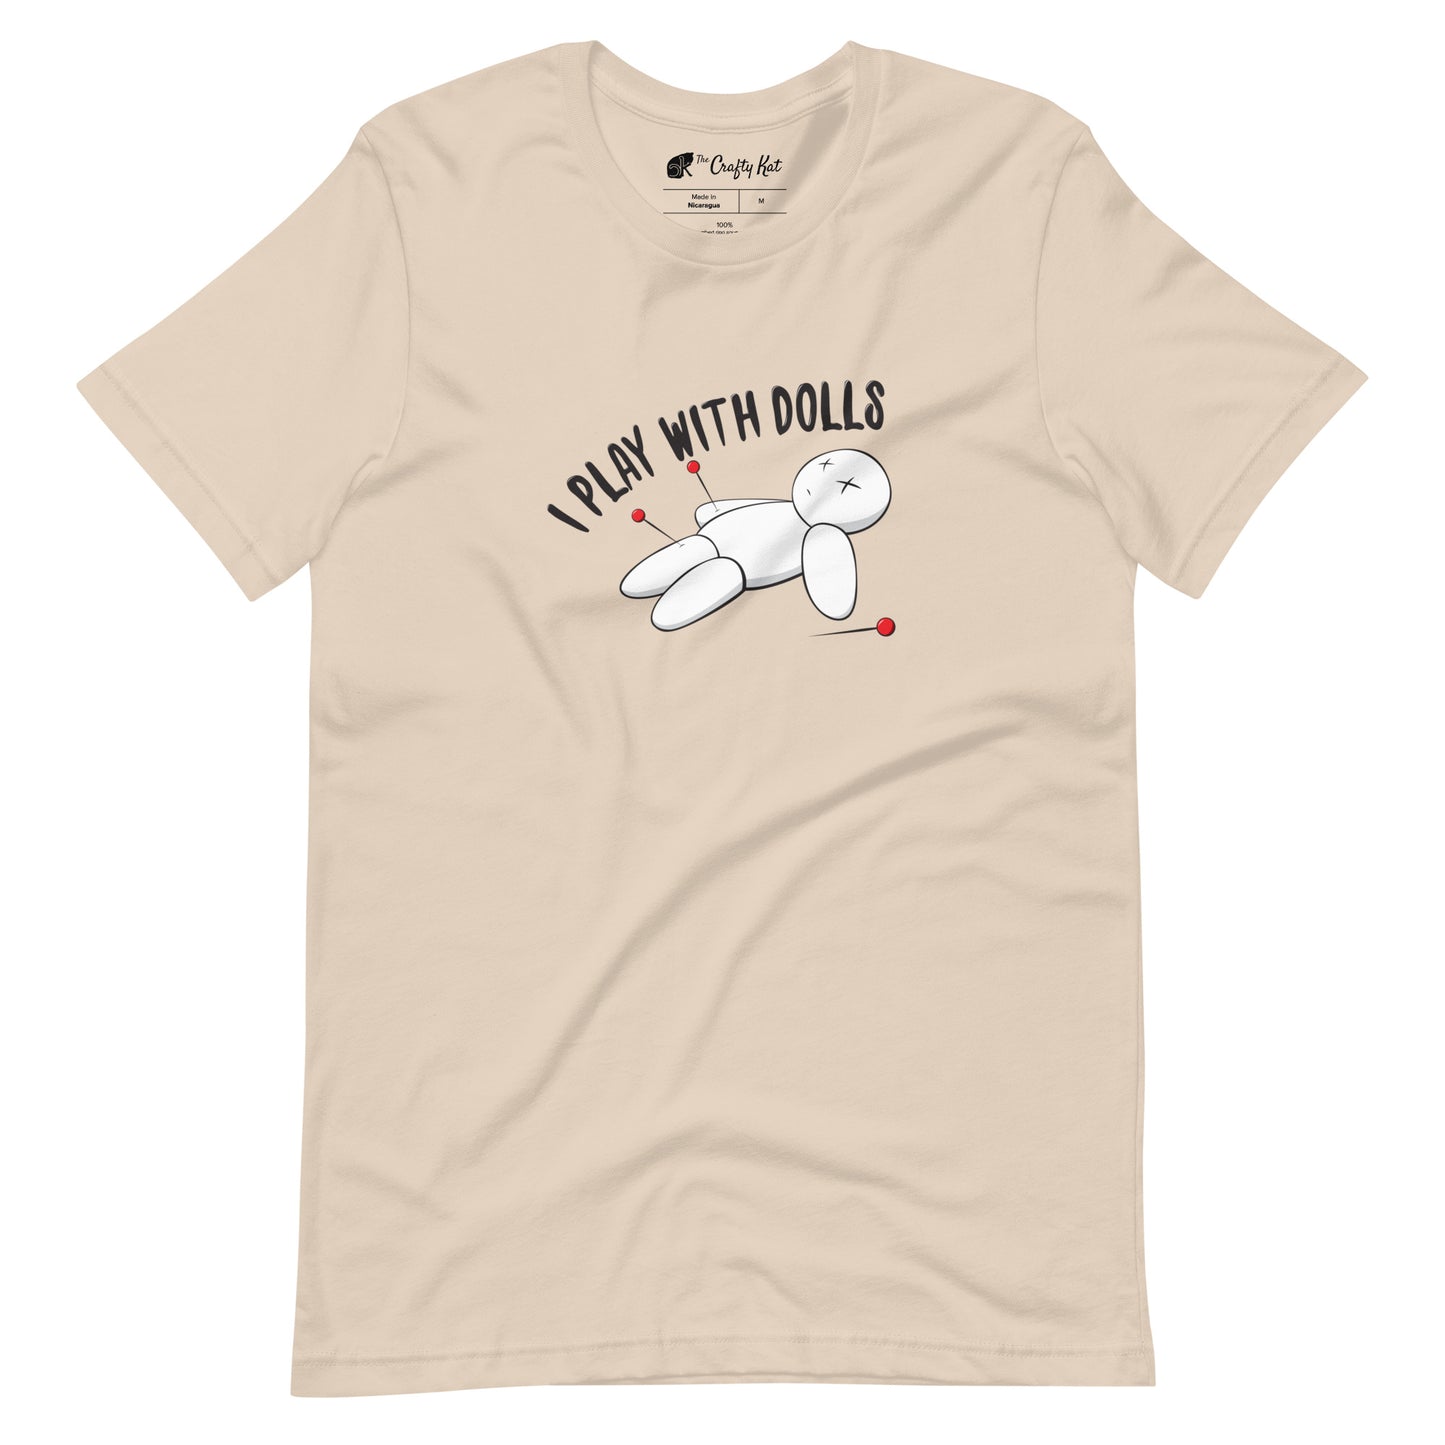 Soft Cream t-shirt with graphic of white voodoo doll with Xs for eyes stuck with several pins and text "I PLAY WITH DOLLS"